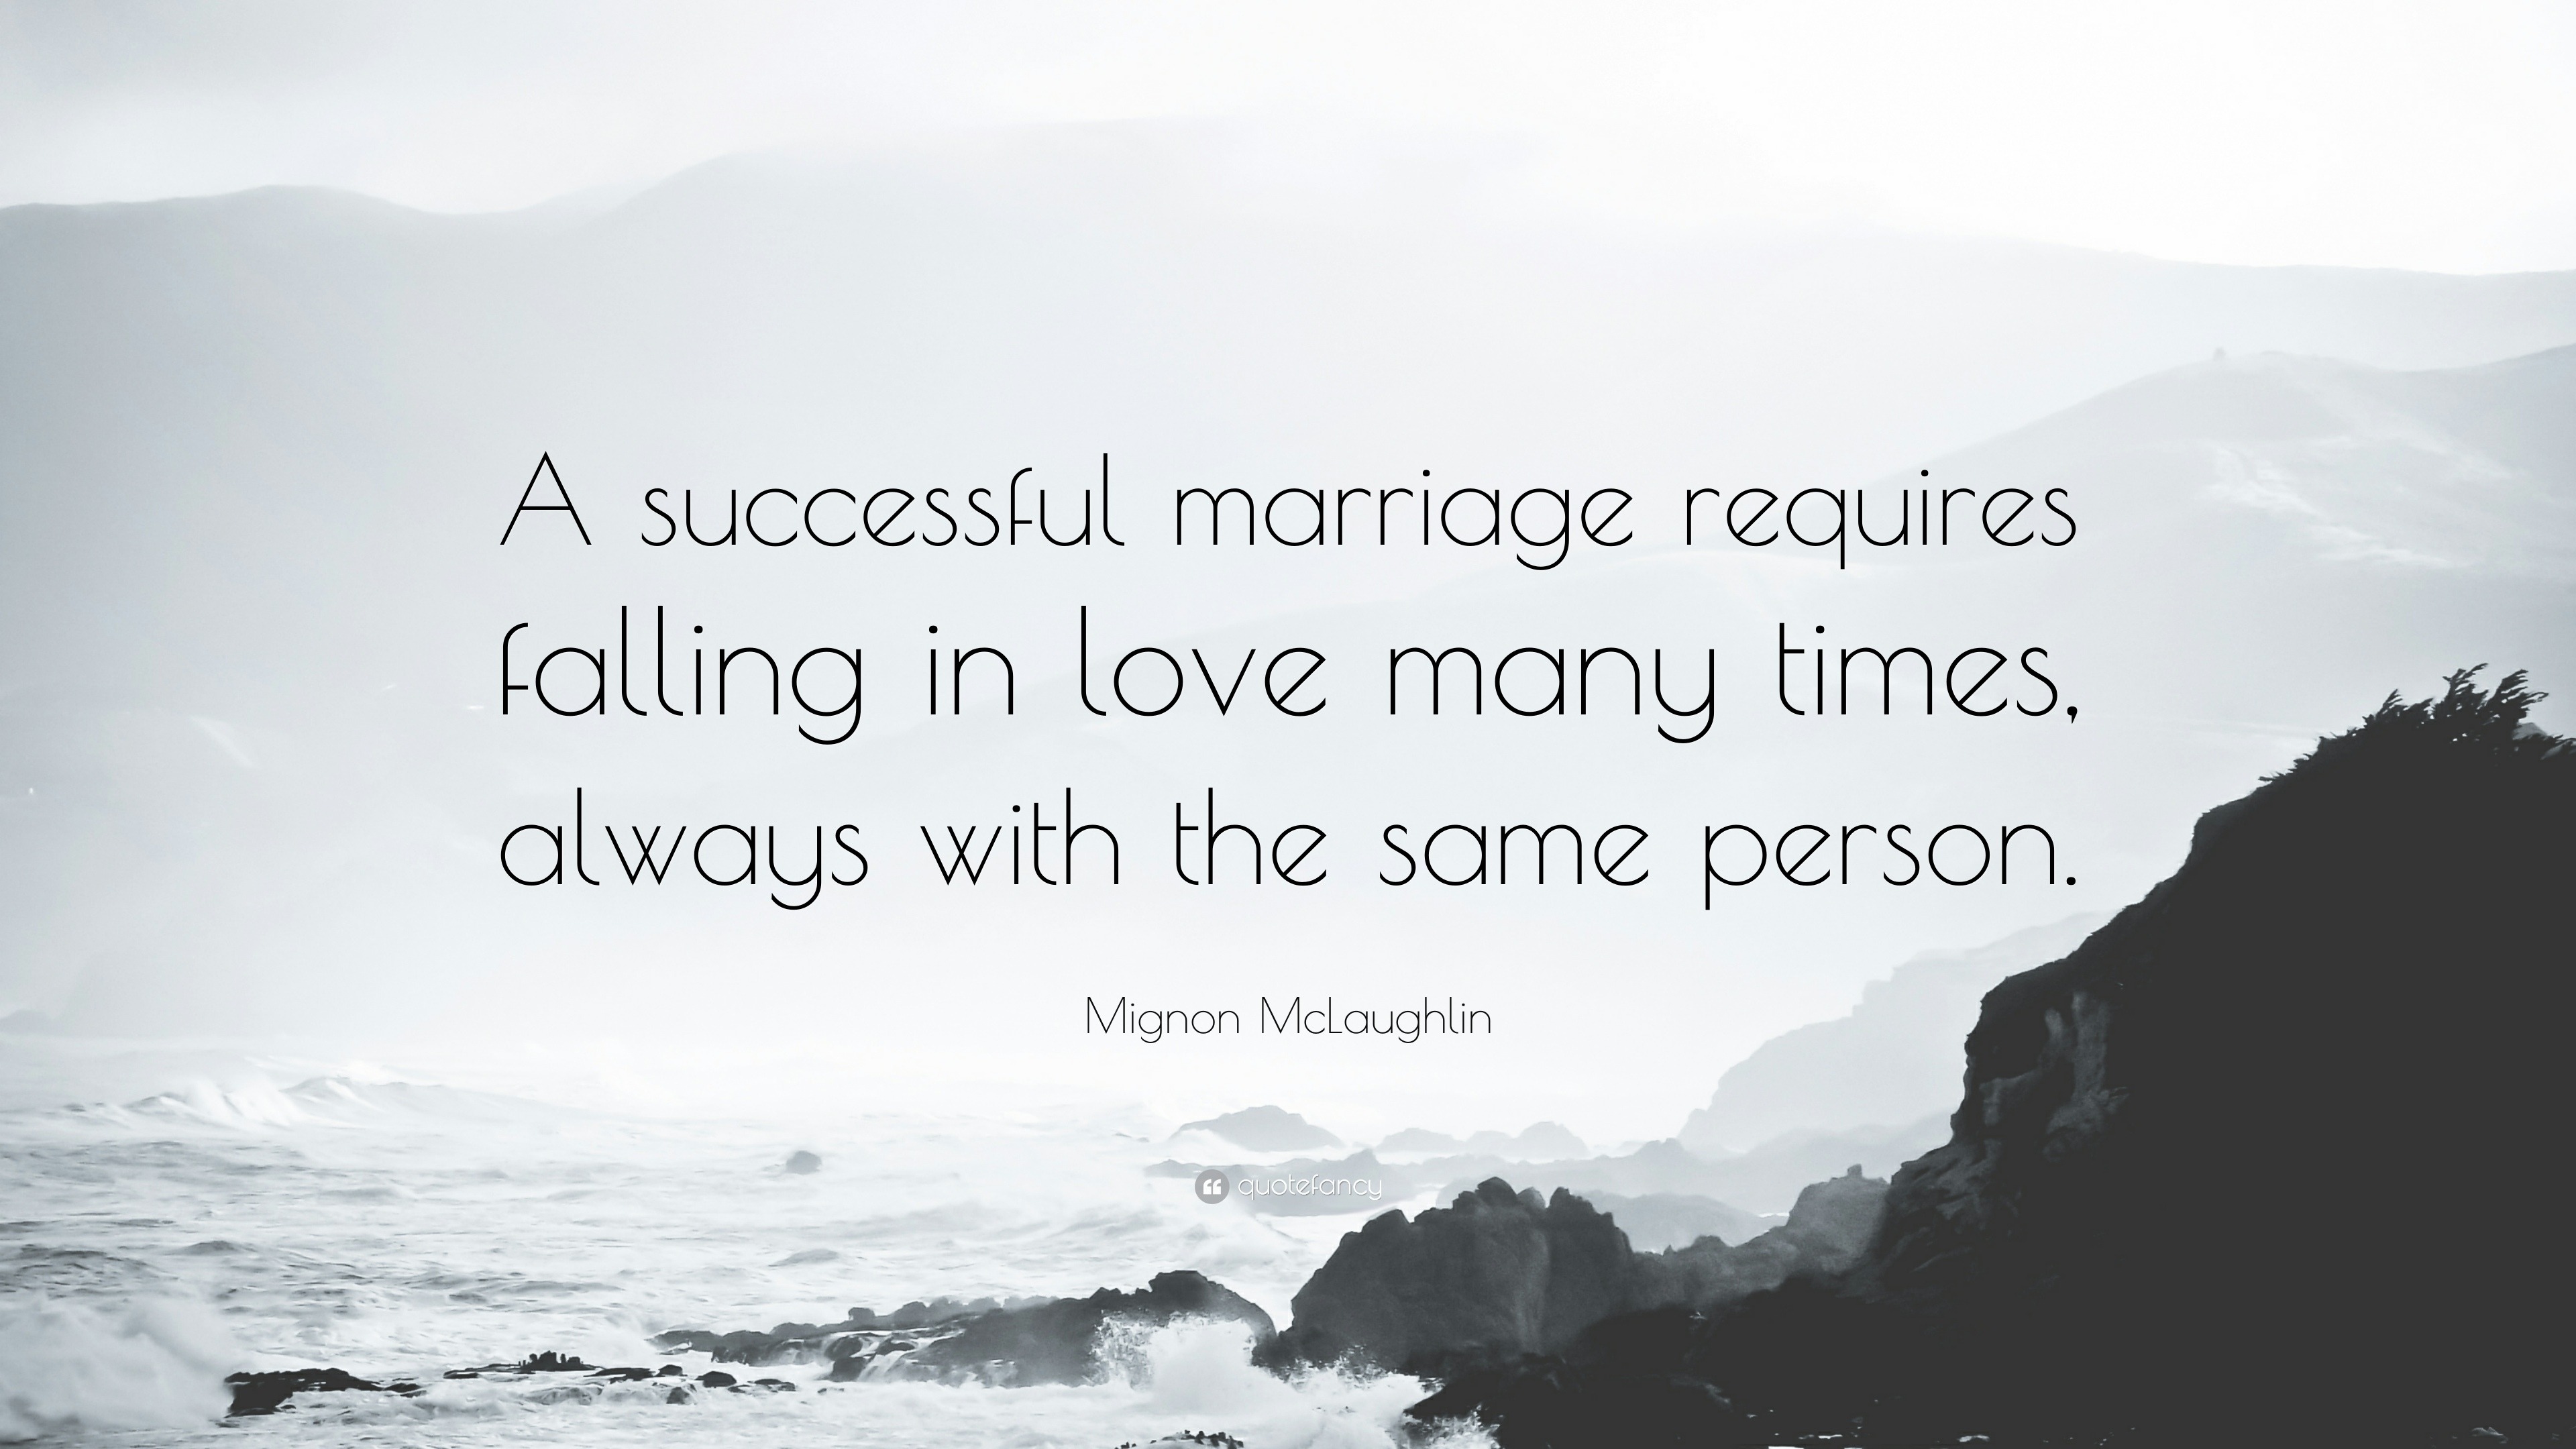 Mignon McLaughlin Quote “A successful marriage requires falling in love many times always